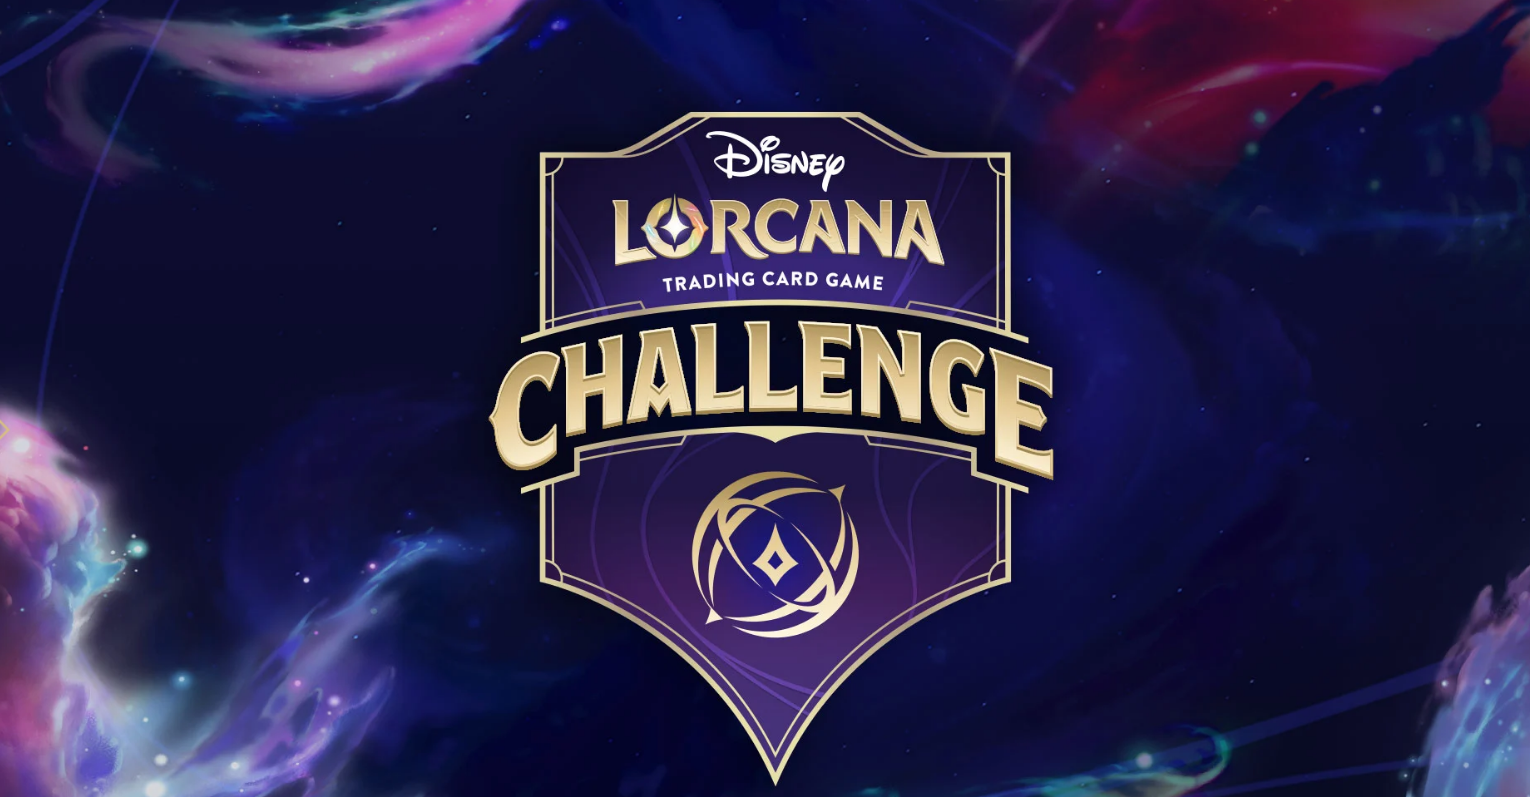 Ravensburger Increases Player Cap For All Upcoming Disney Lorcana Challenges